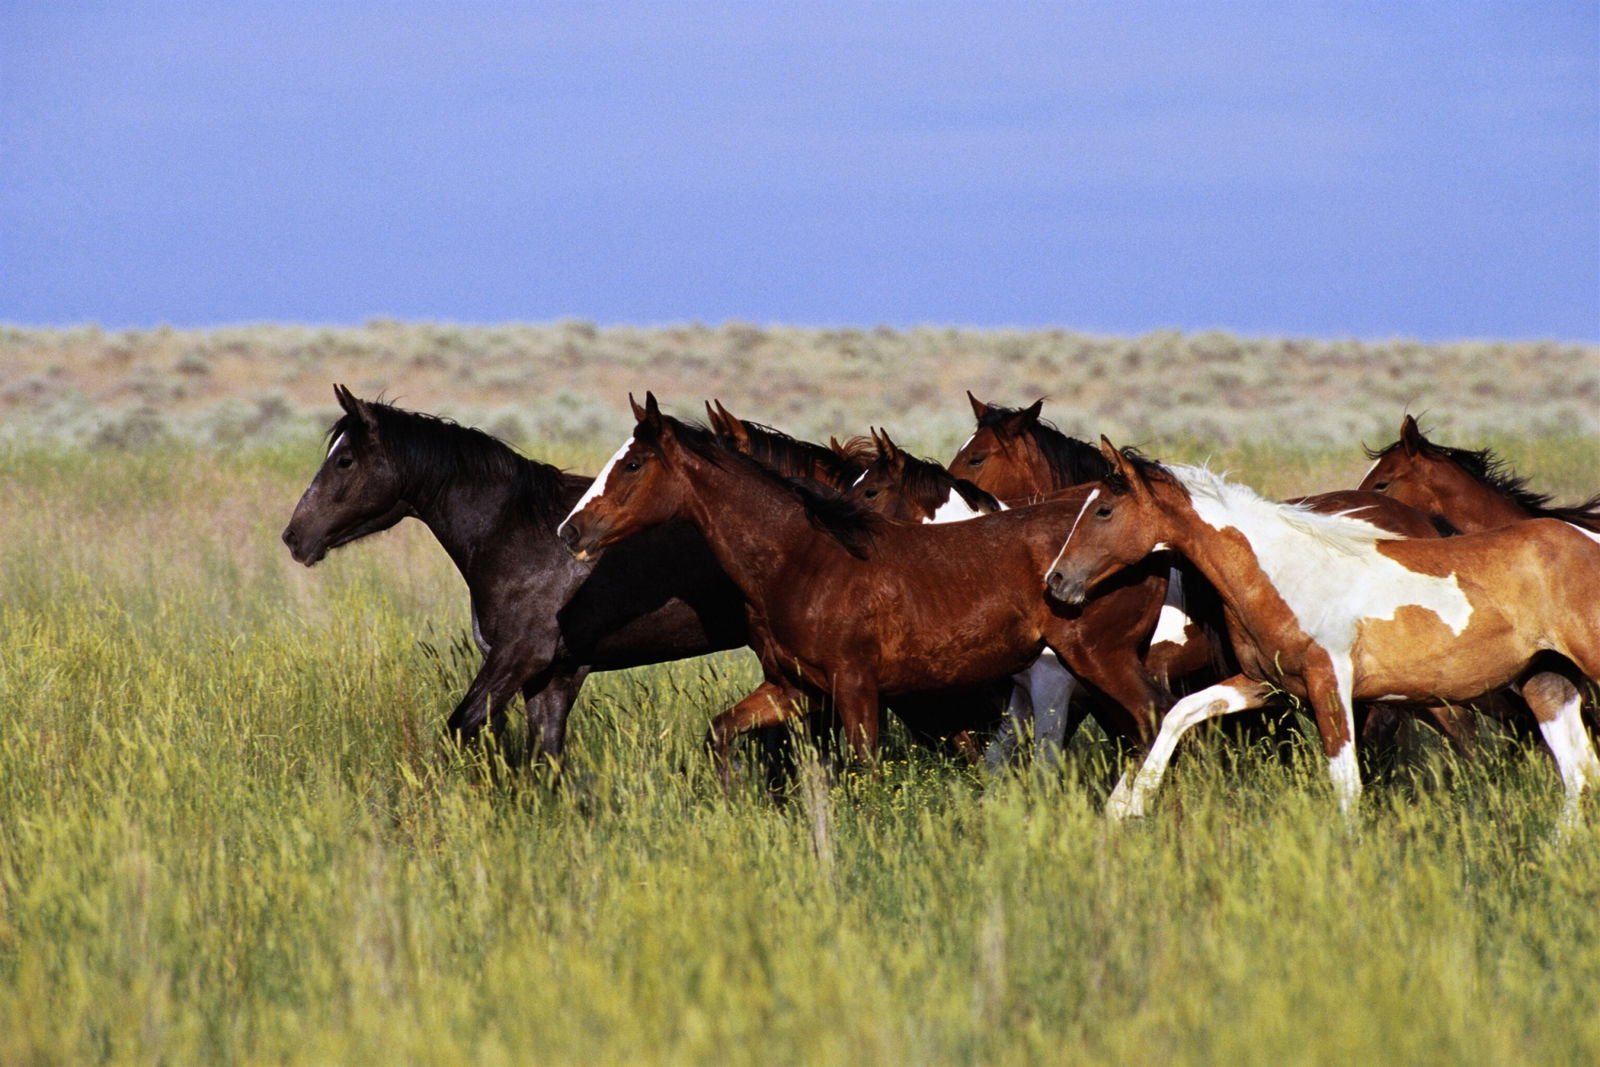 A group of horses, looking wild and free